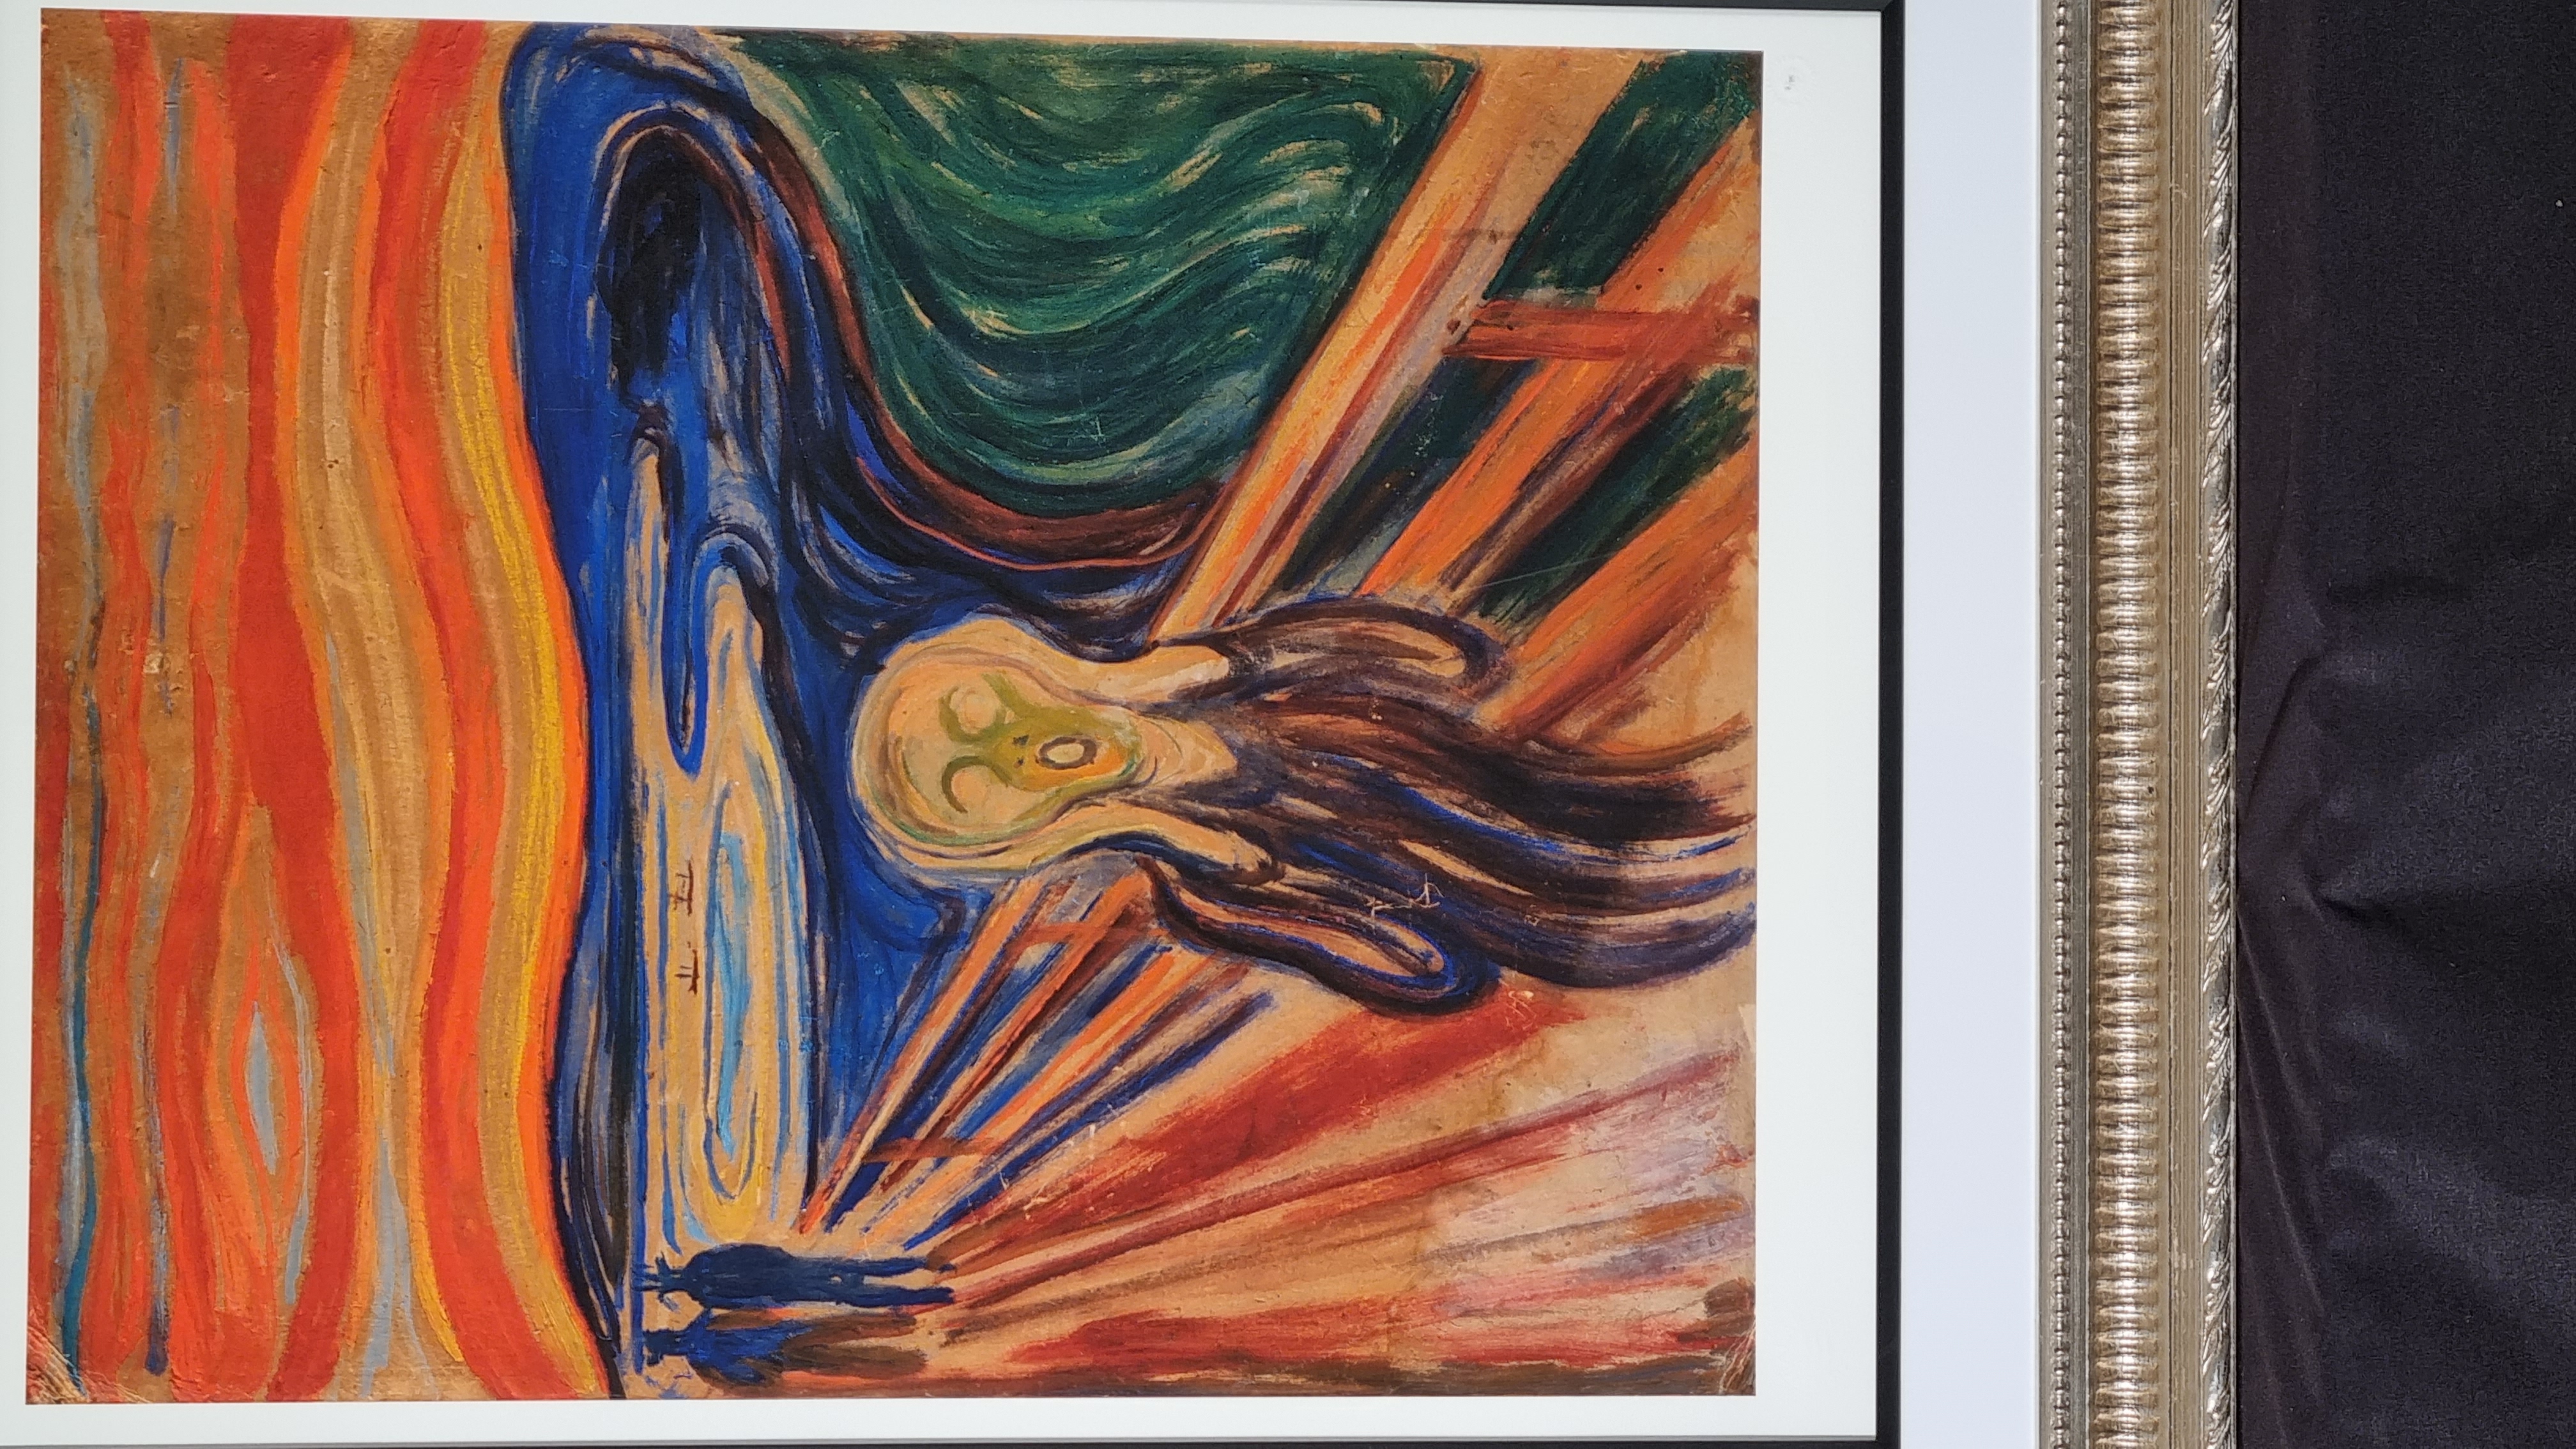 Rare Limited Edition Edvard Munch "The Scream" - Image 4 of 7